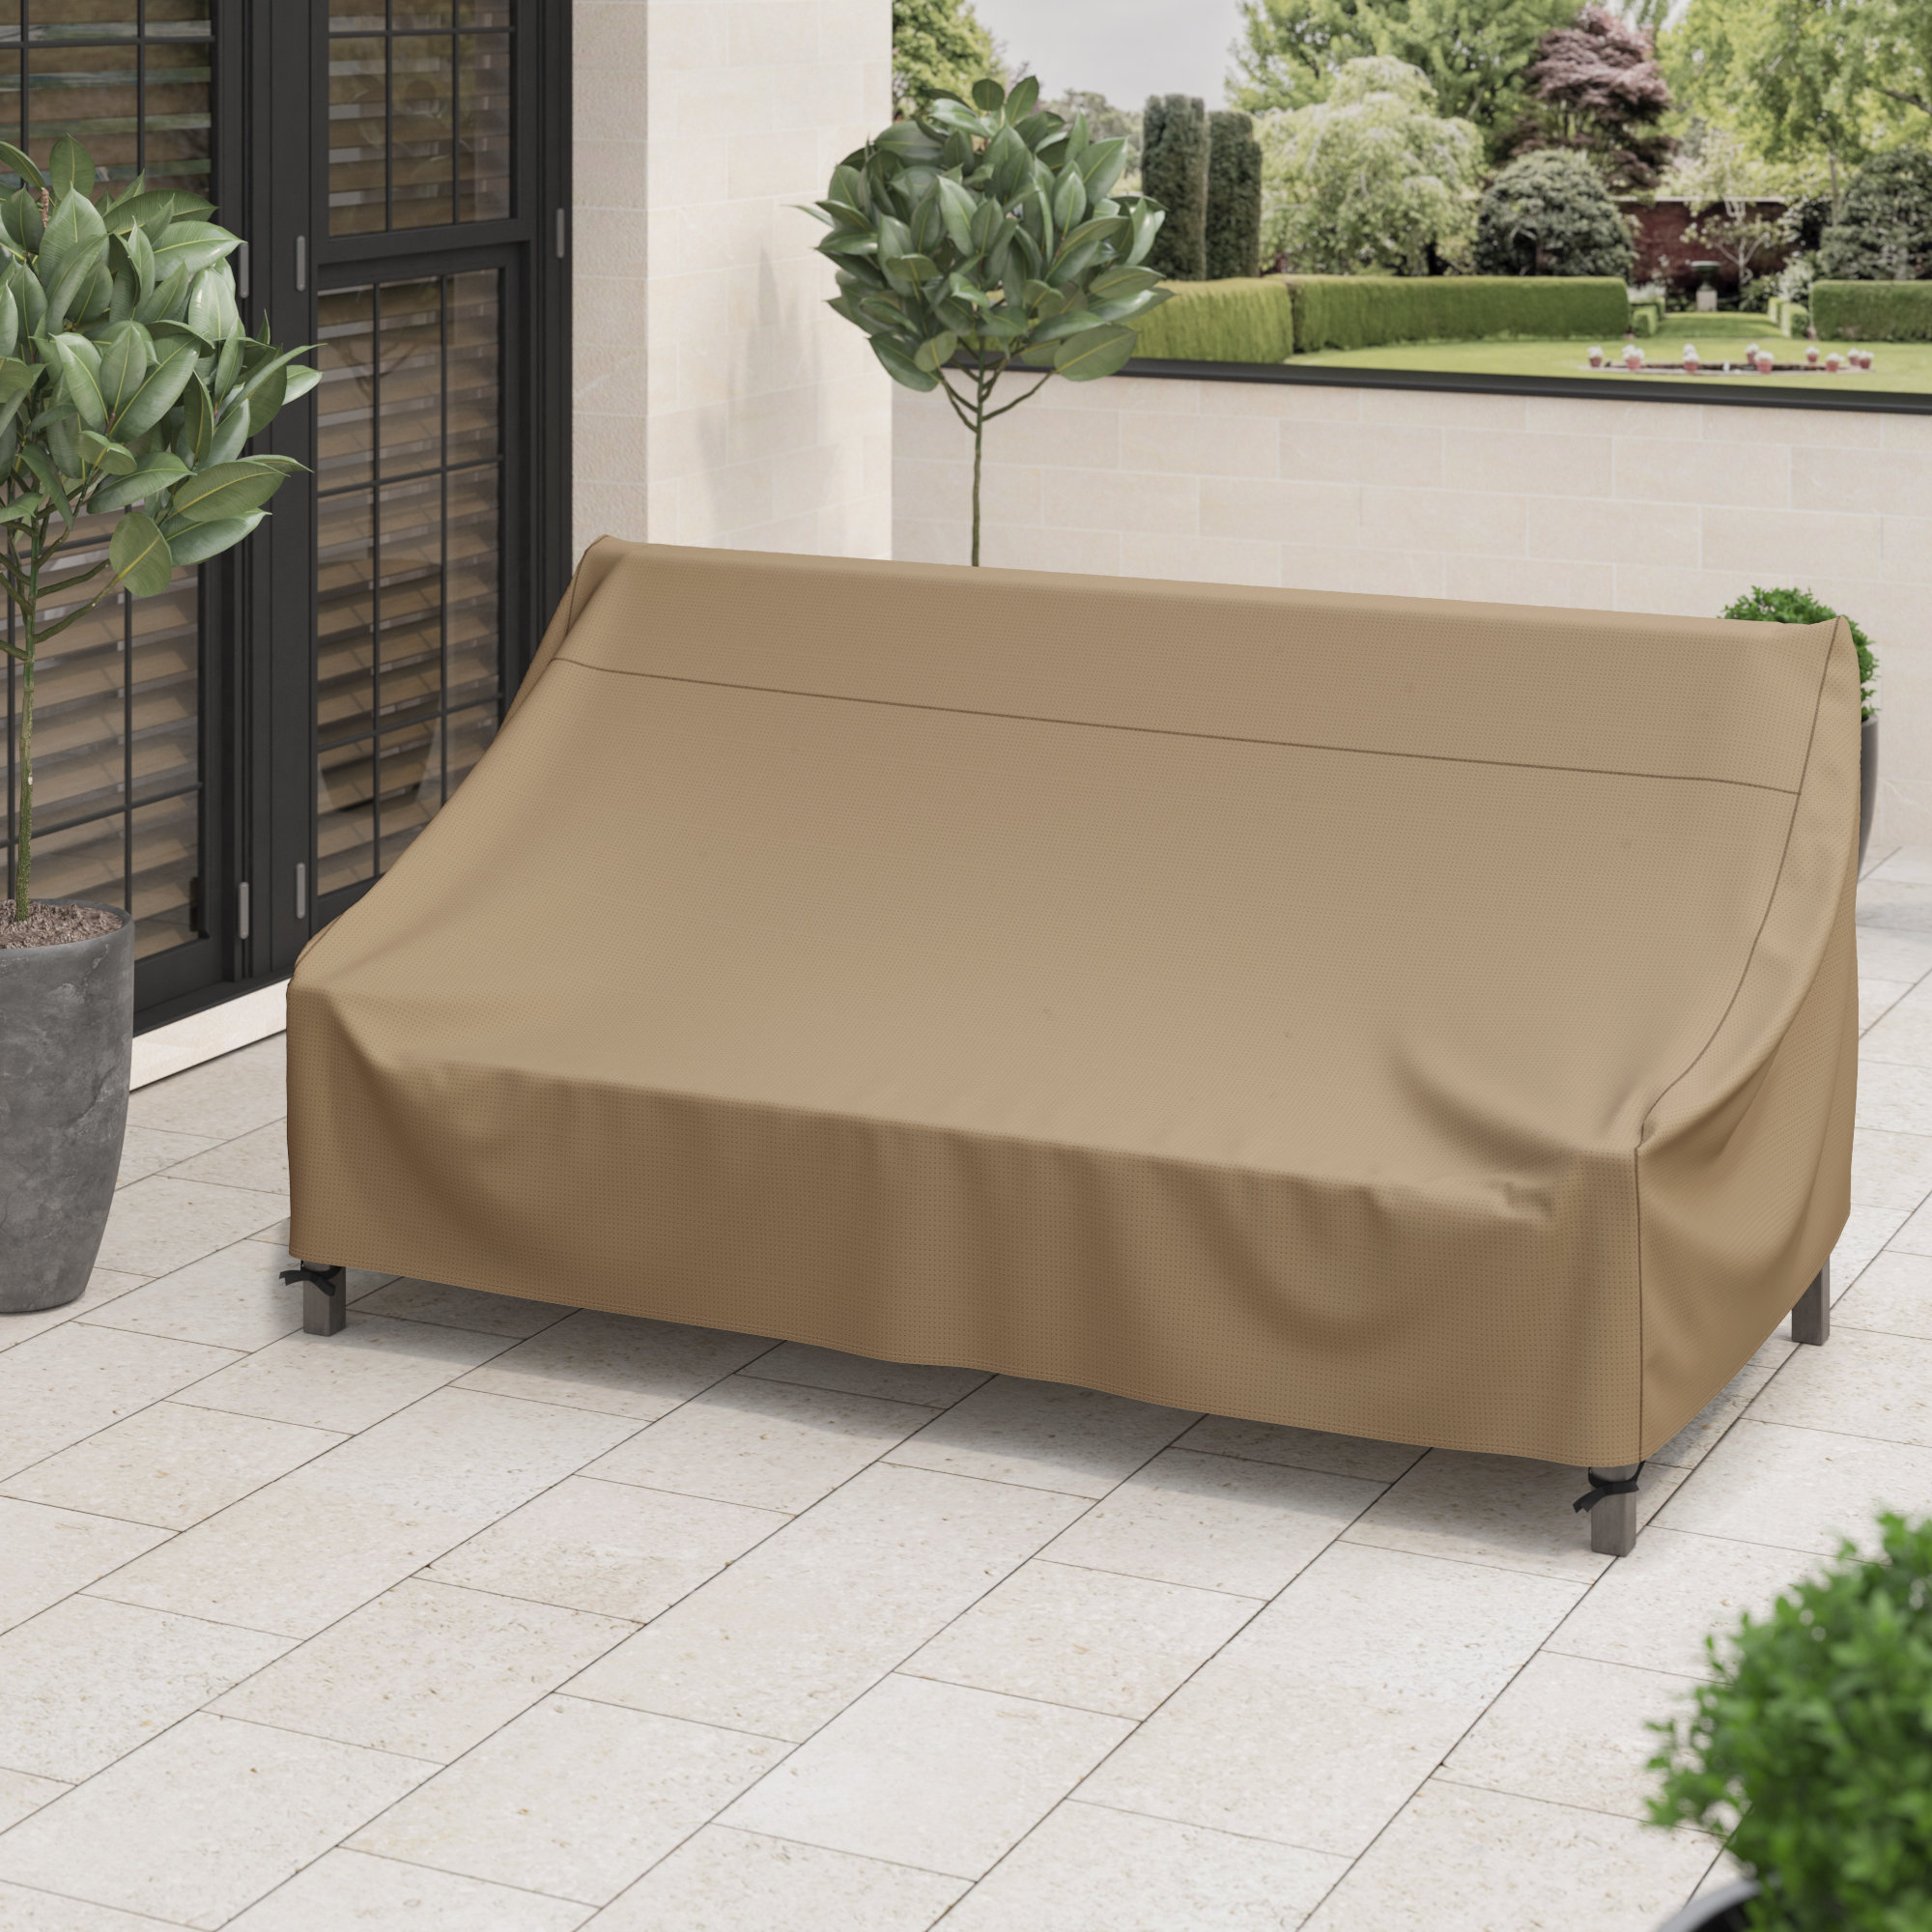  ULTCOVER Square Patio Heavy Duty Table Cover - 600D Tough  Canvas Waterproof Outdoor Dining Table and Chairs General Purpose Furniture  Cover Size 106 inch : Patio, Lawn & Garden